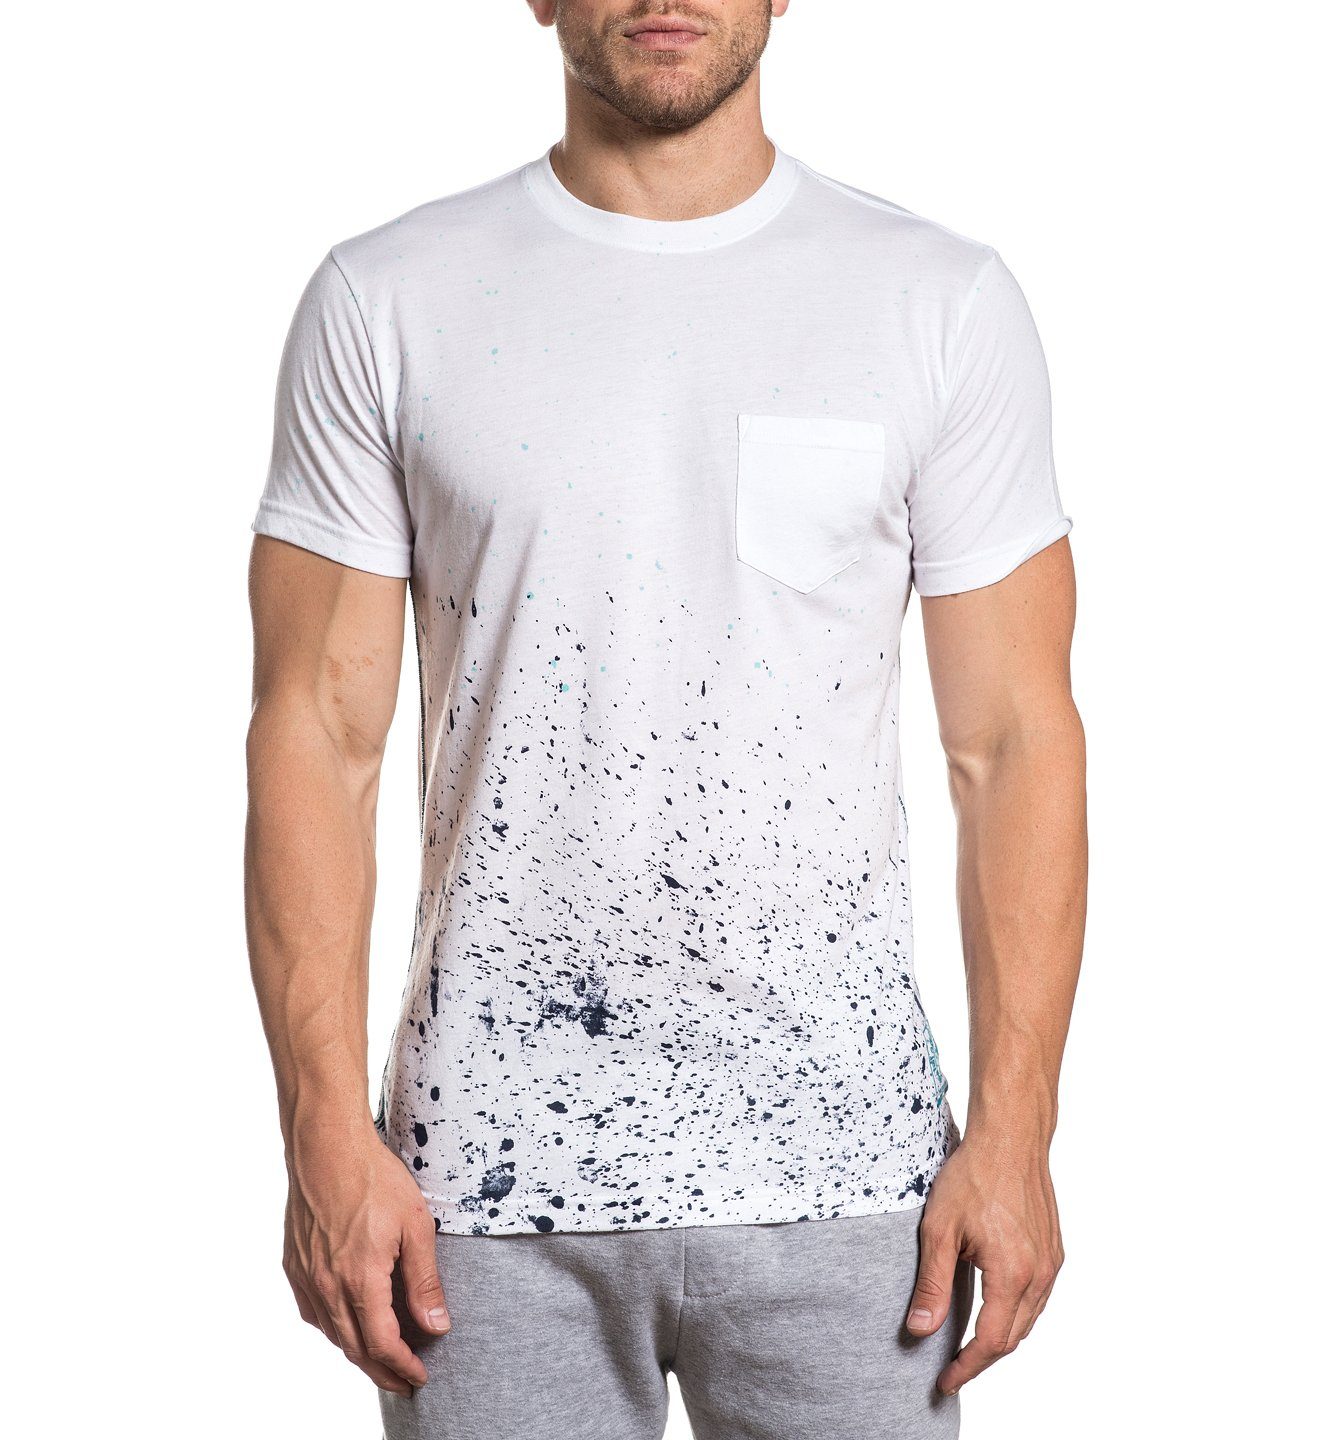 Cold Bay - Mens Short Sleeve Tees - American Fighter